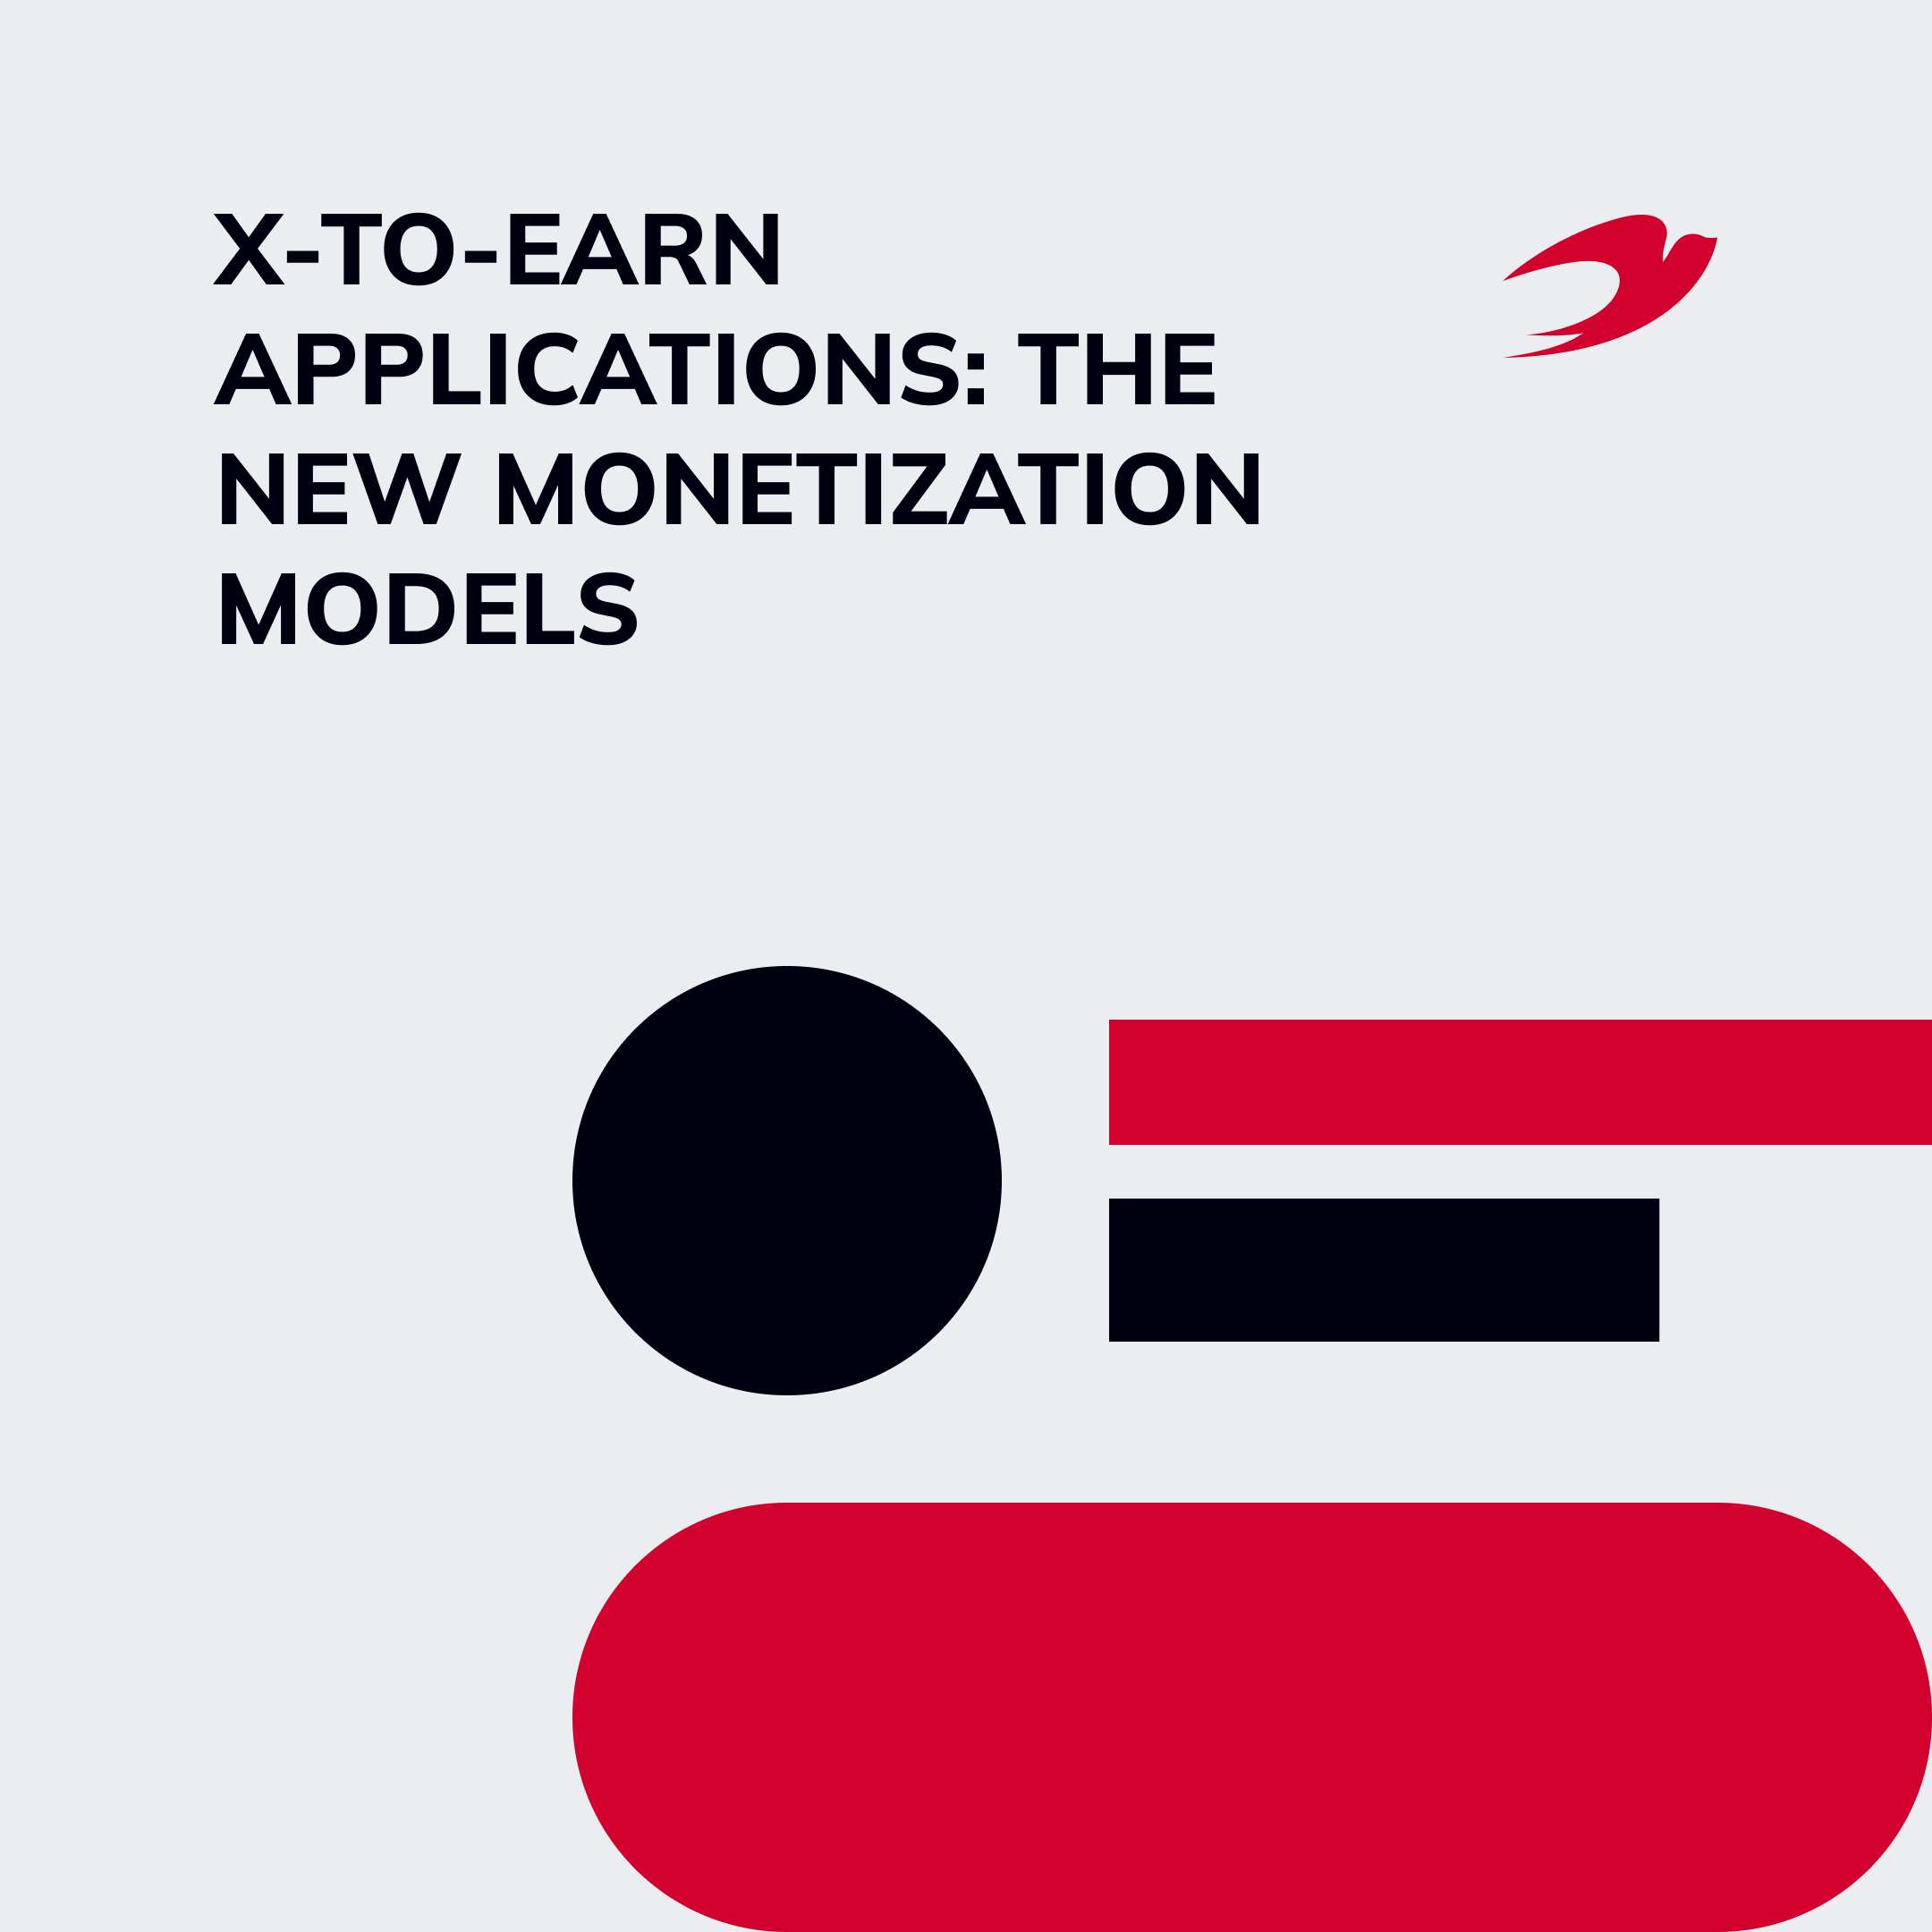 X-to-Earn Applications: The New Monetization Models